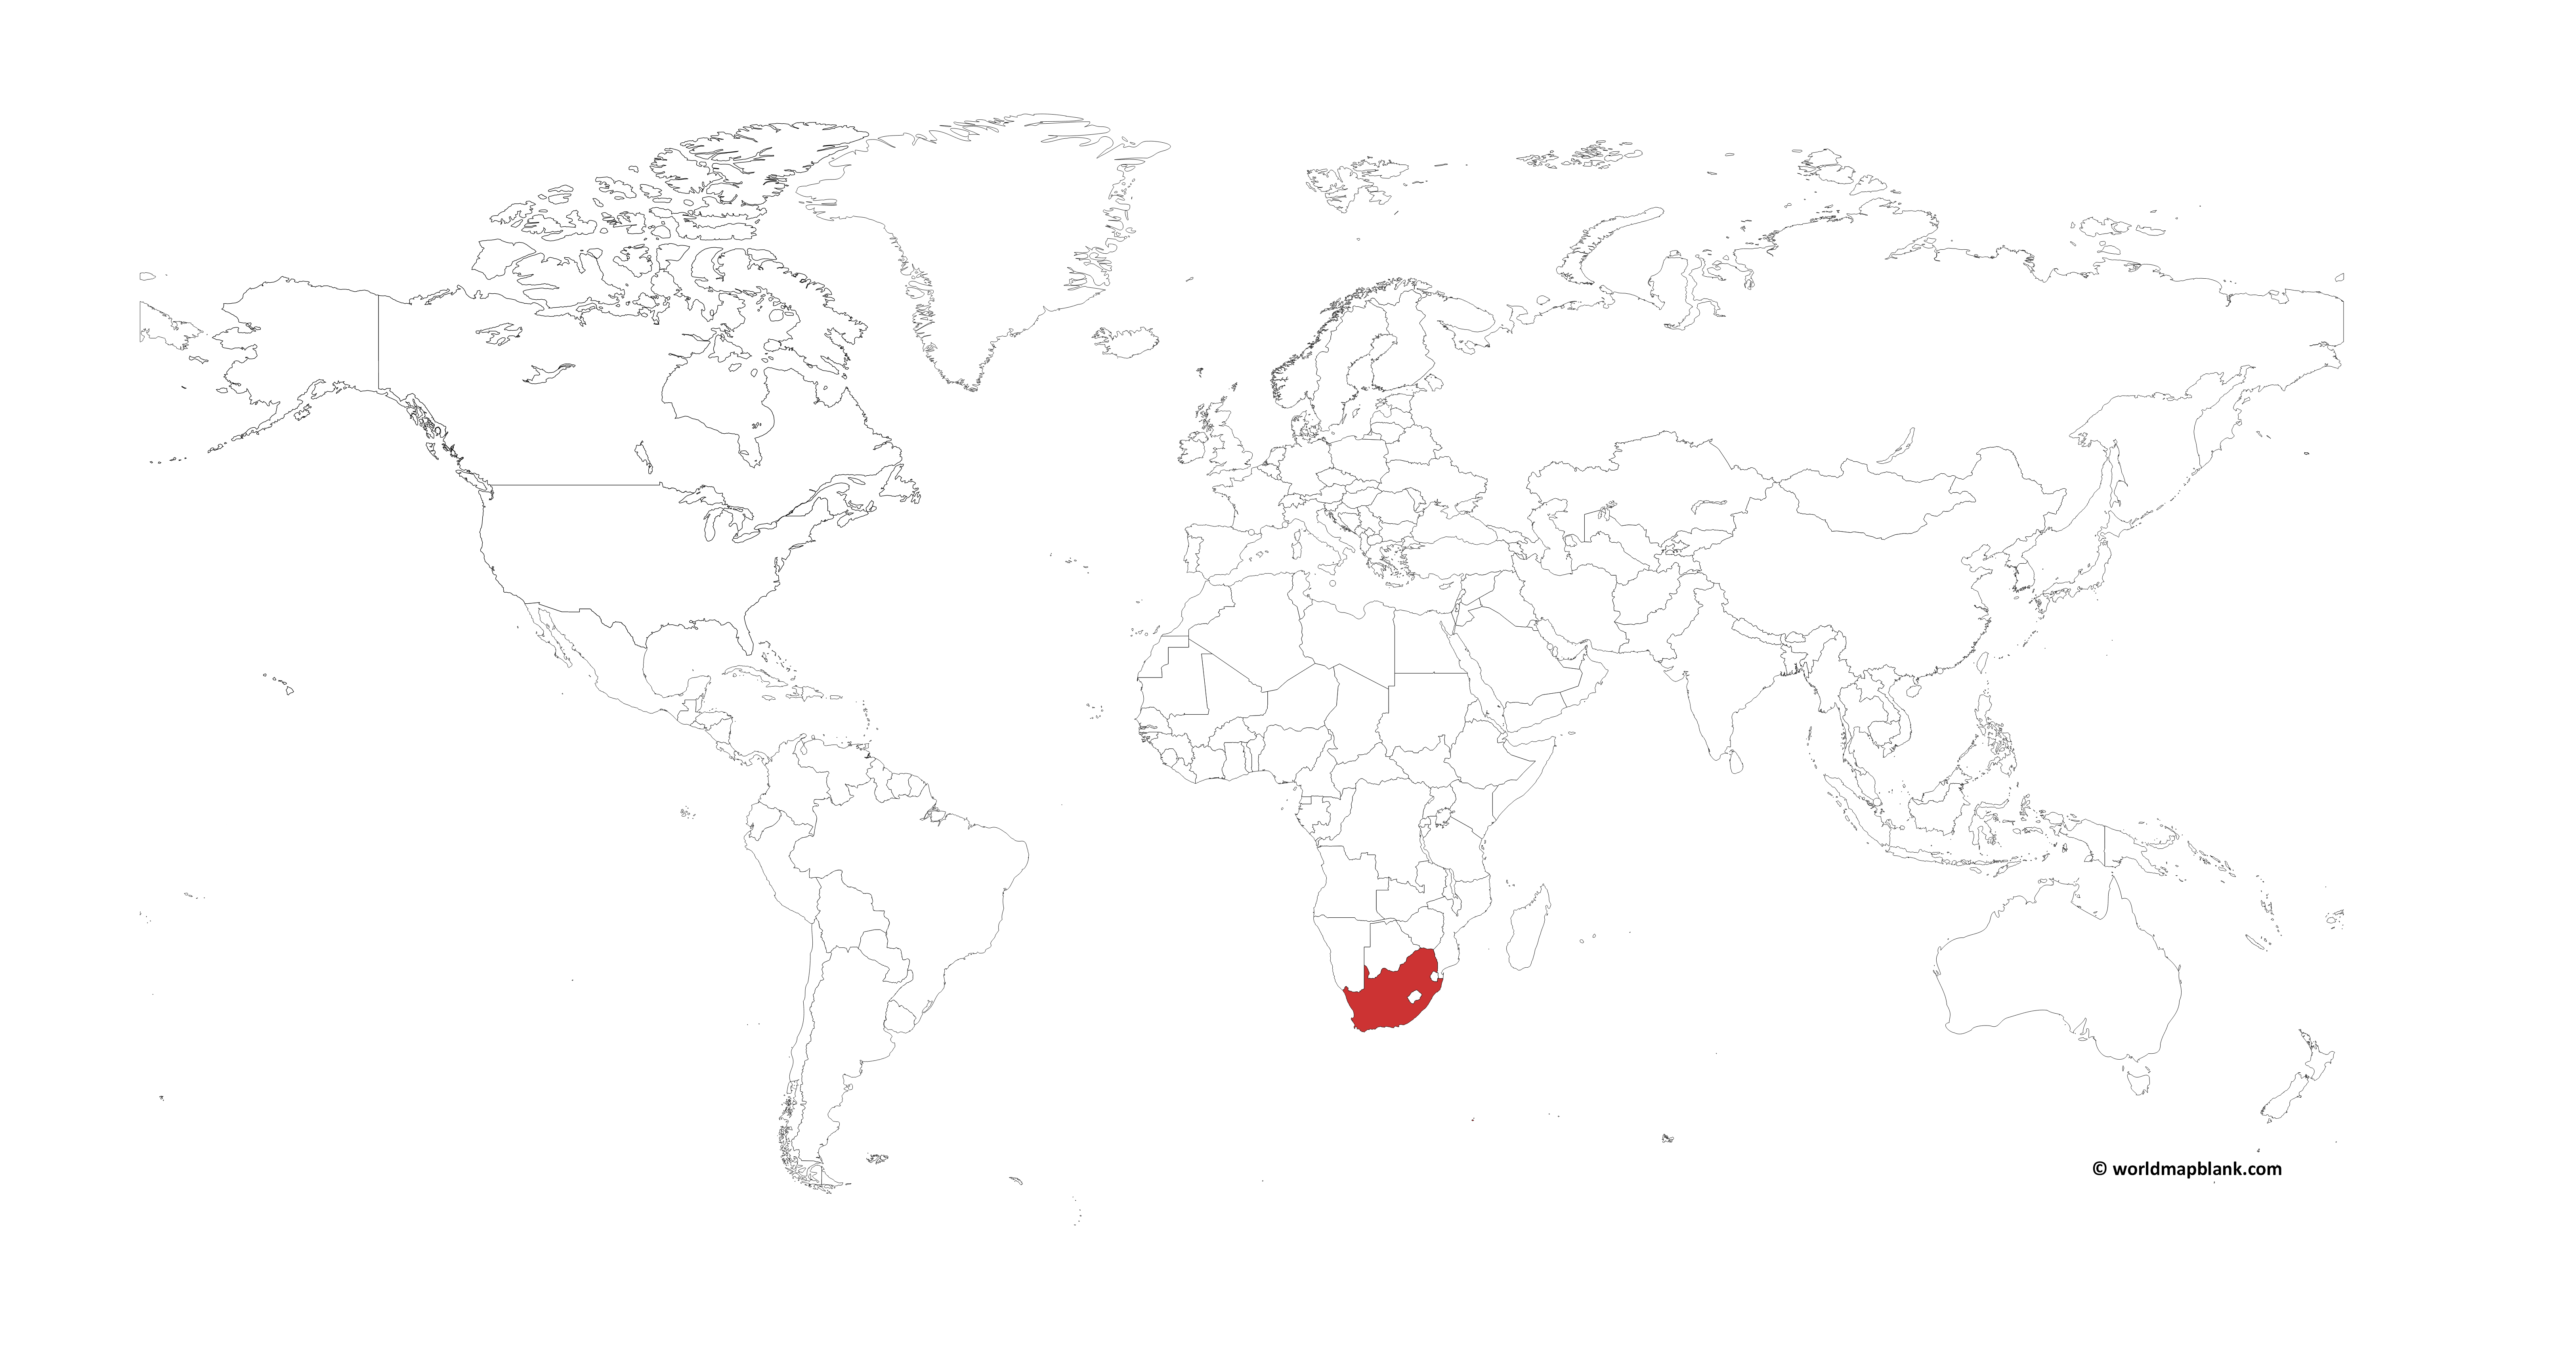 South Africa on the World Map